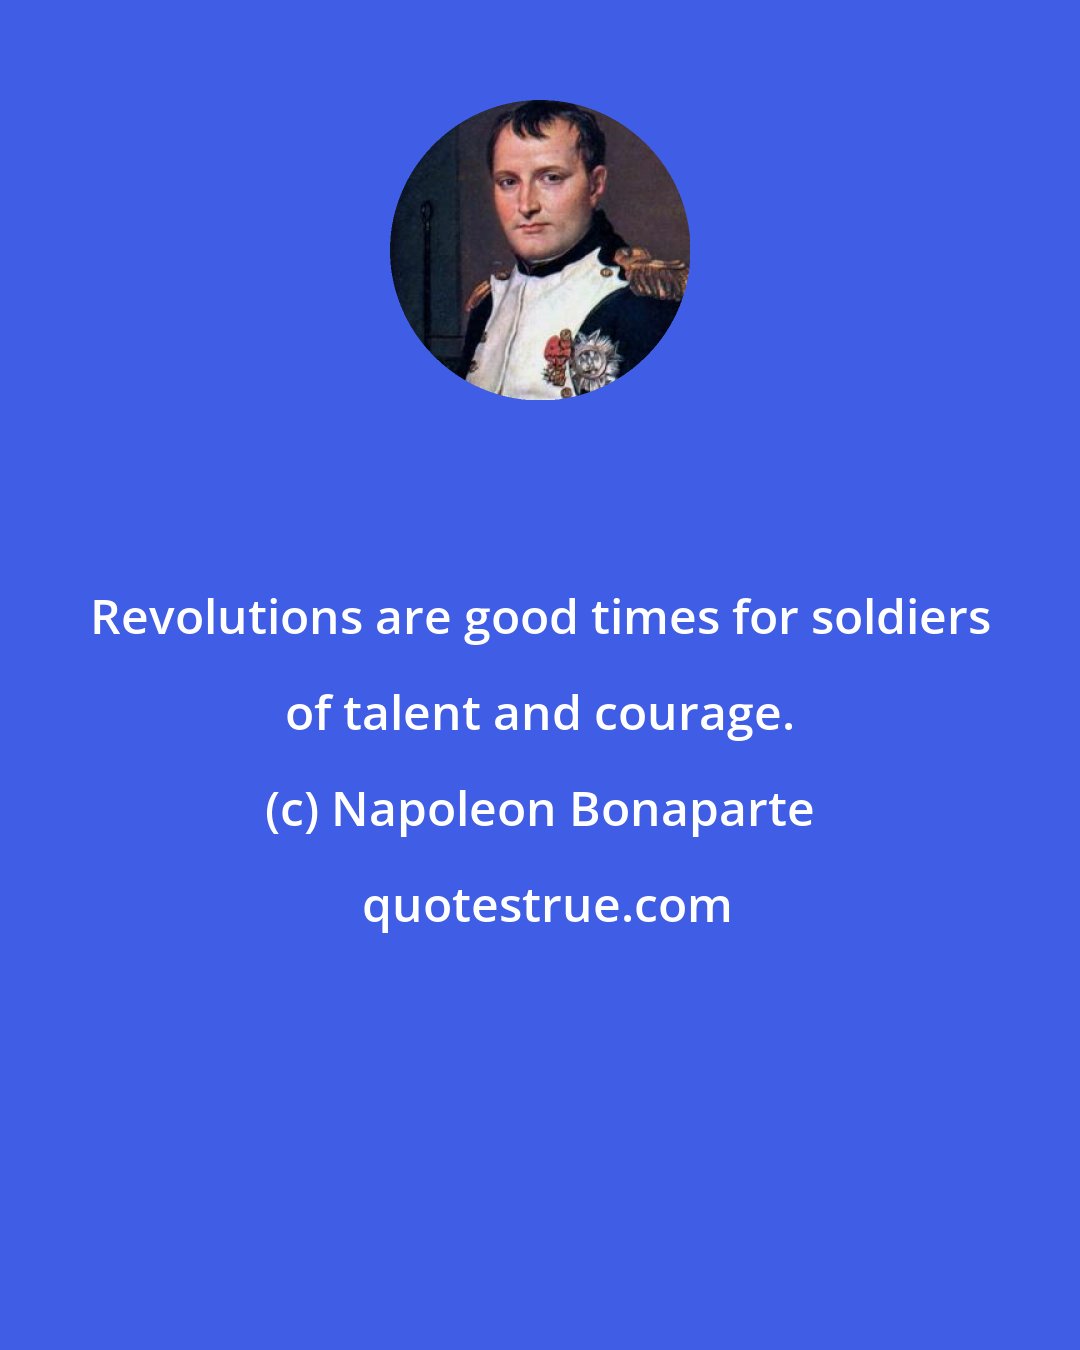 Napoleon Bonaparte: Revolutions are good times for soldiers of talent and courage.